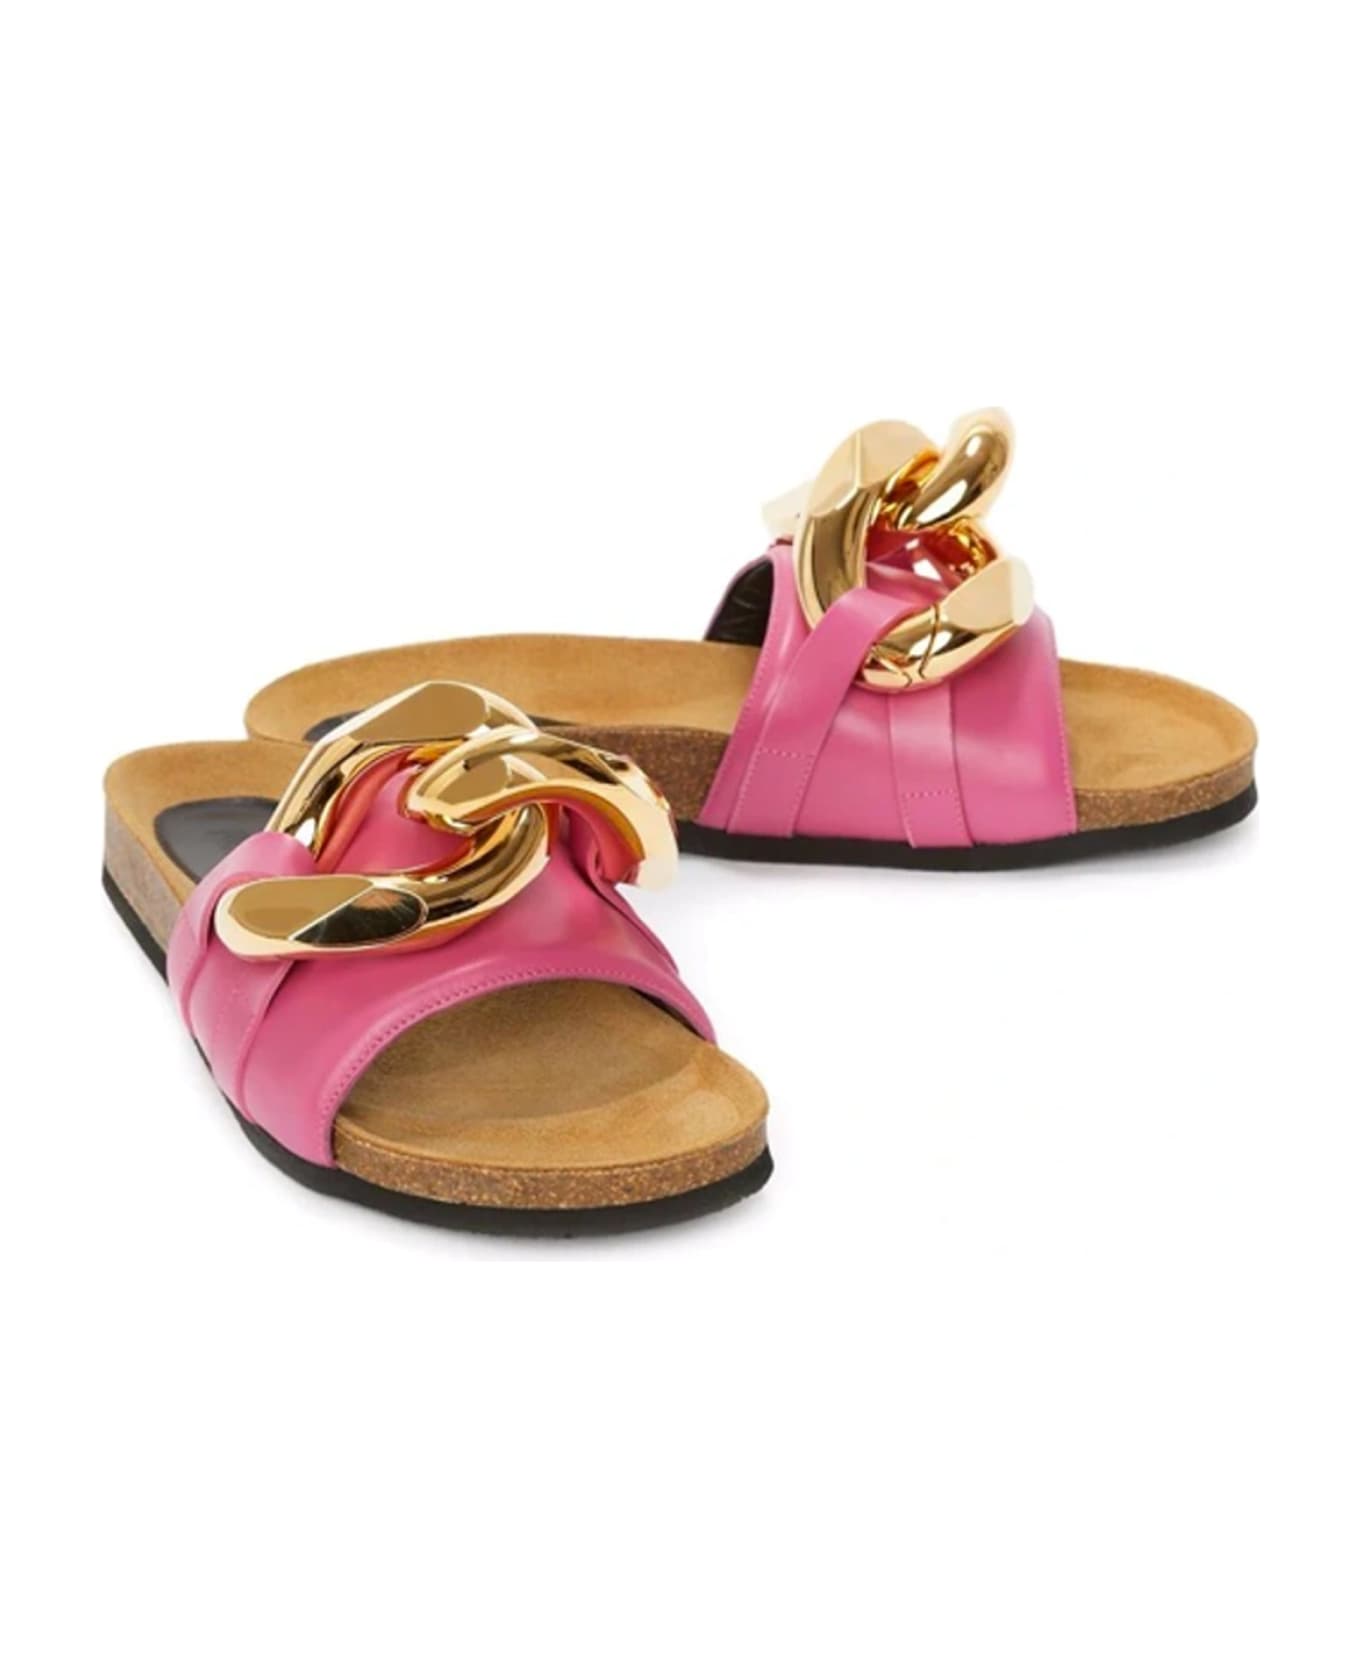 J.W. Anderson Leather Flat Sandals - Pink